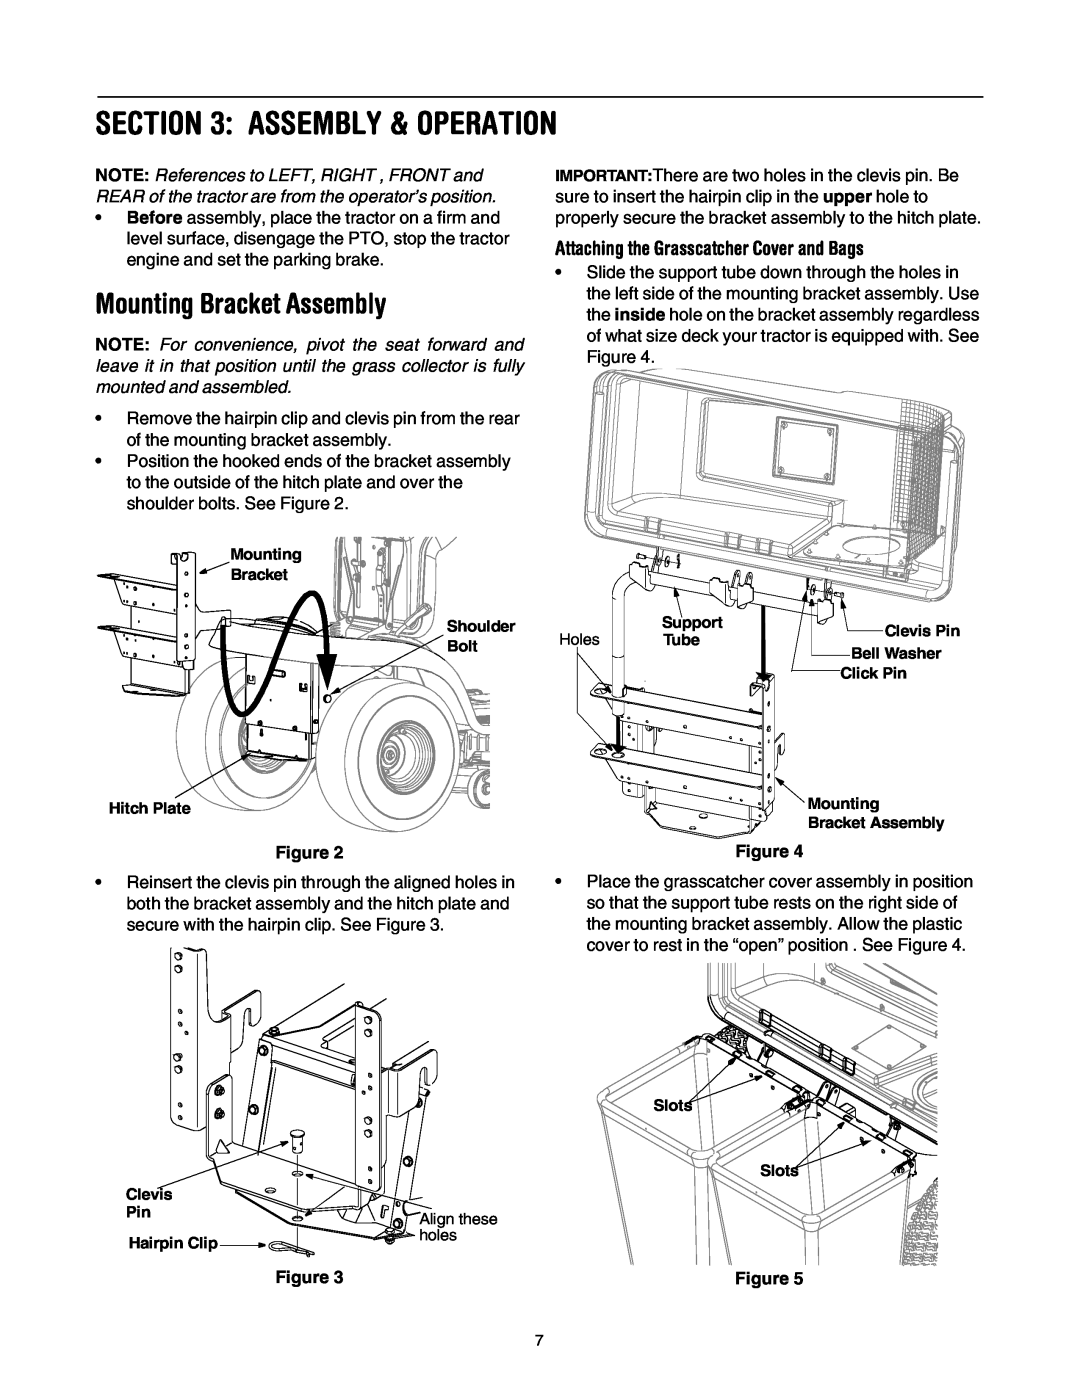 Cub Cadet 190-678-100 manual Assembly & Operation, Mounting Bracket Assembly, Attaching the Grasscatcher Cover and Bags 